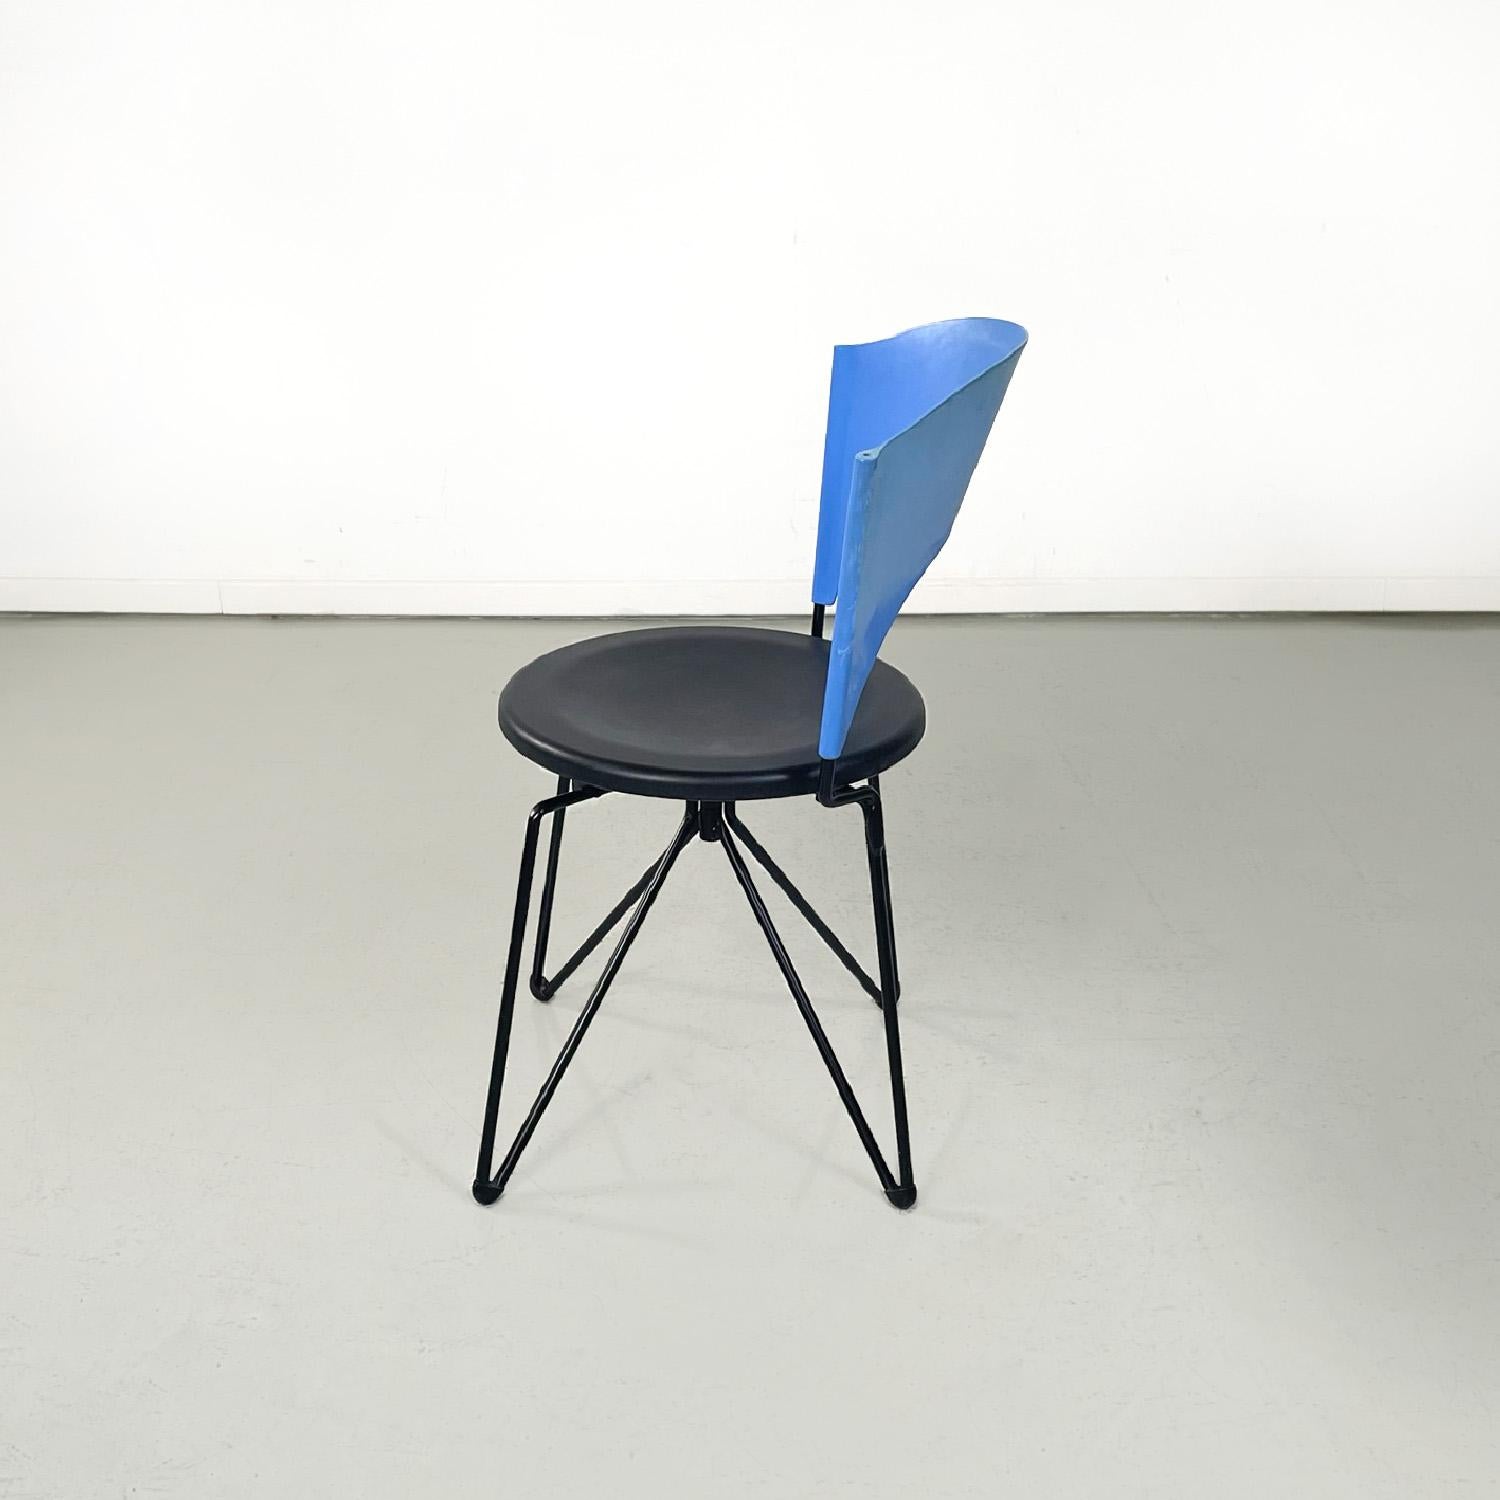 Italian modern black and blue chair Sofia by Carlo Bartoli for Bonaldi, 1980s
Folding chair mod. Sofia with structure in black painted metal rod. The round seat is in black plastic, the backrest is in light blue plastic and is slightly curved. The